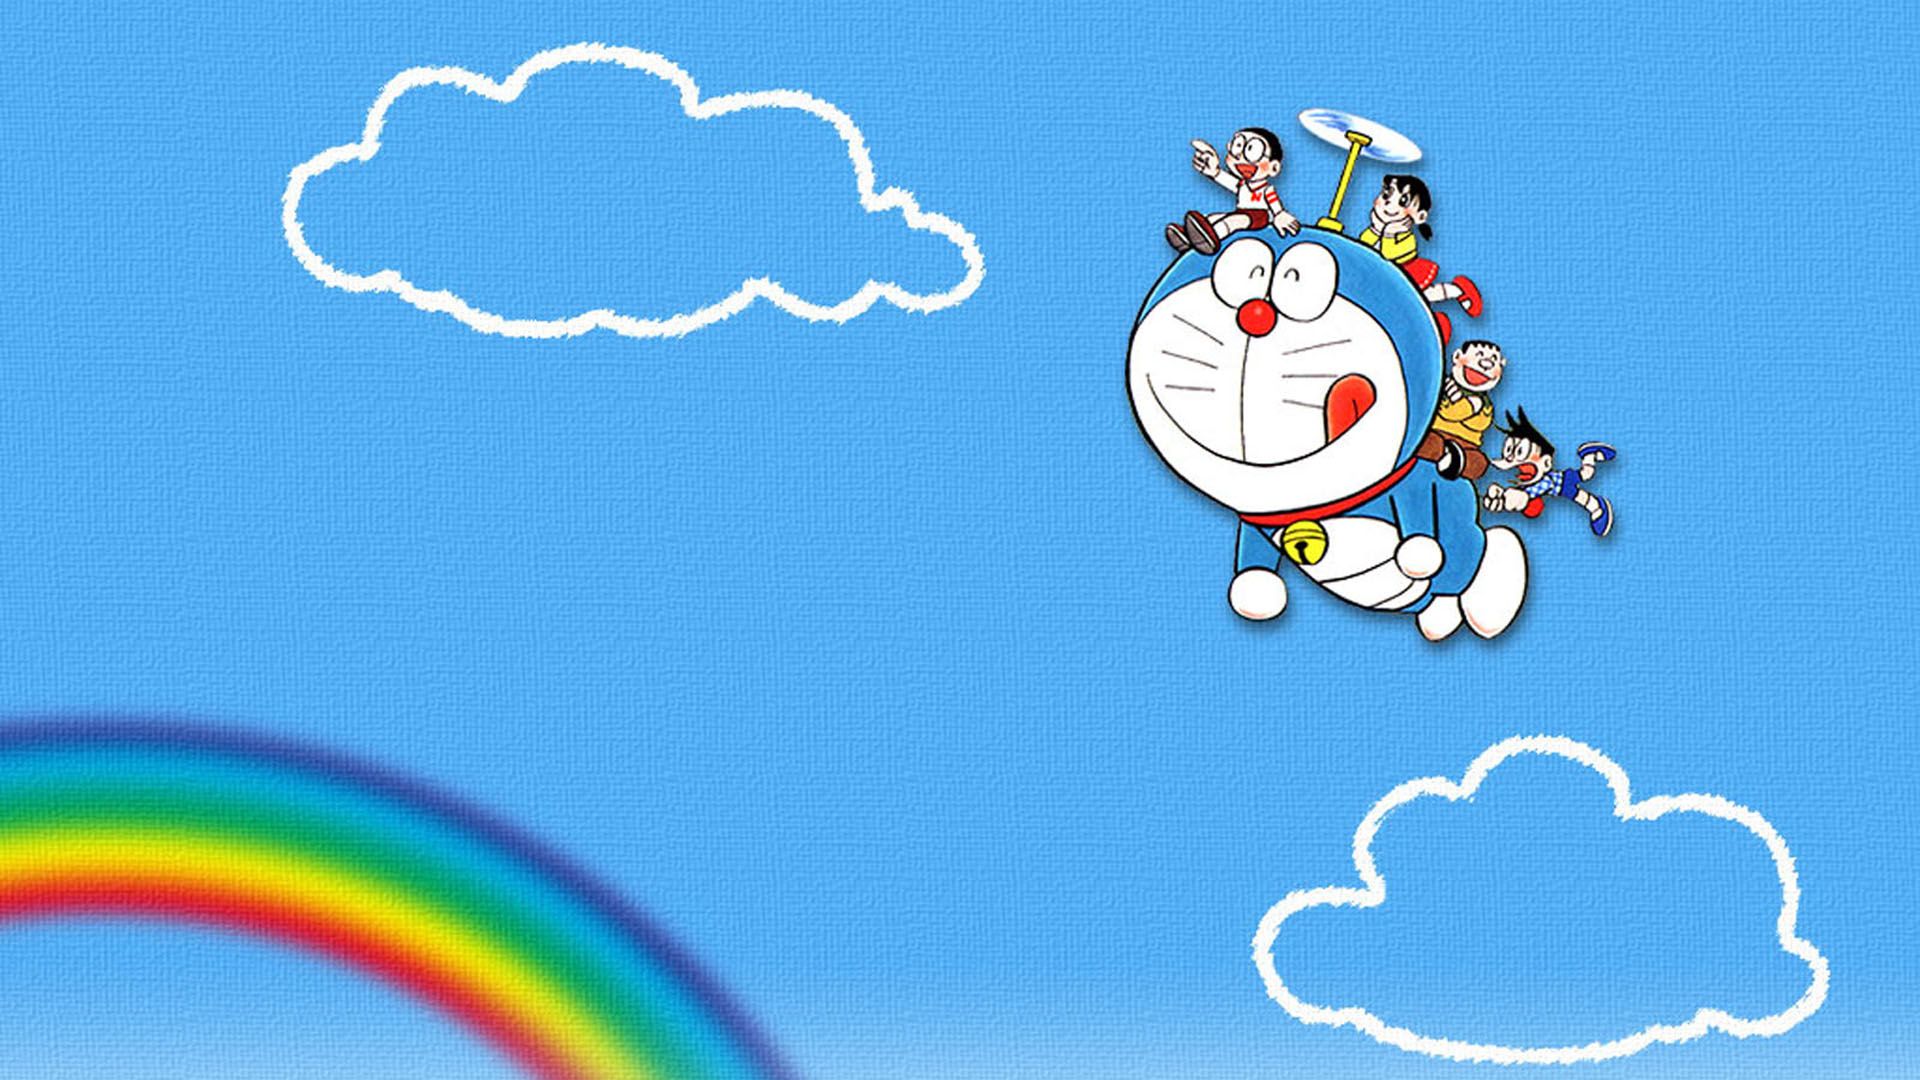 Doraemon HD wallpapers - Gadget Cat from the TV